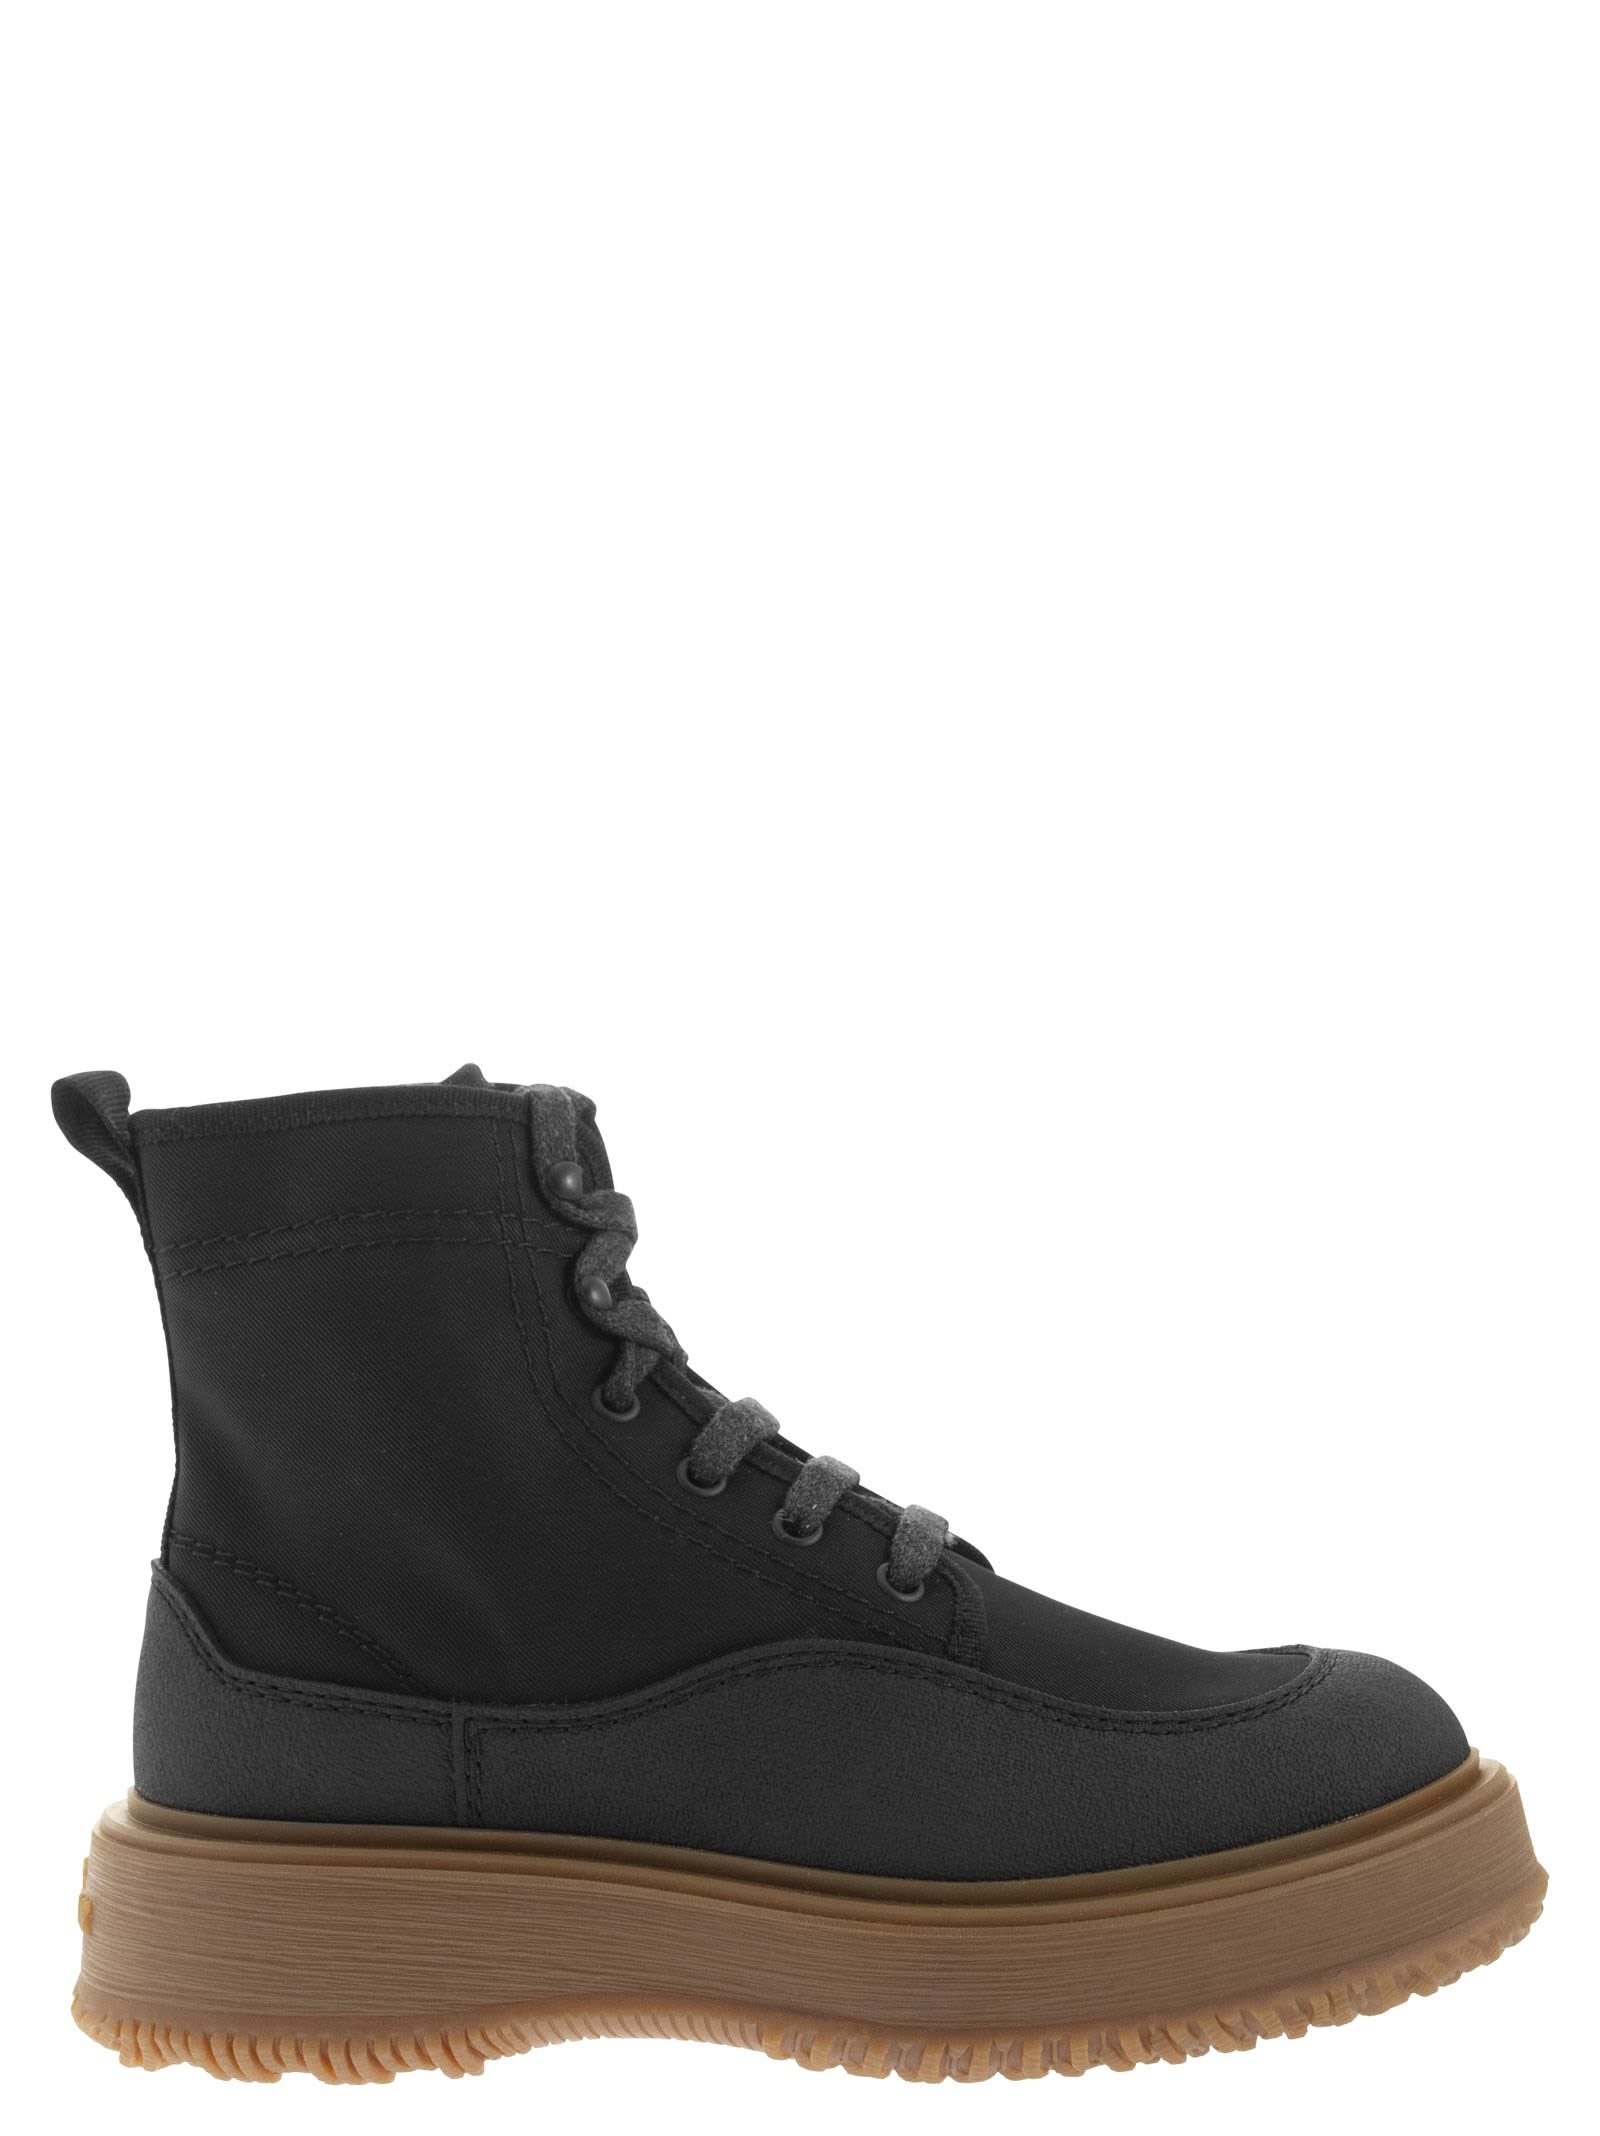 HOGAN UNTRADITIONAL - LACED BOOT